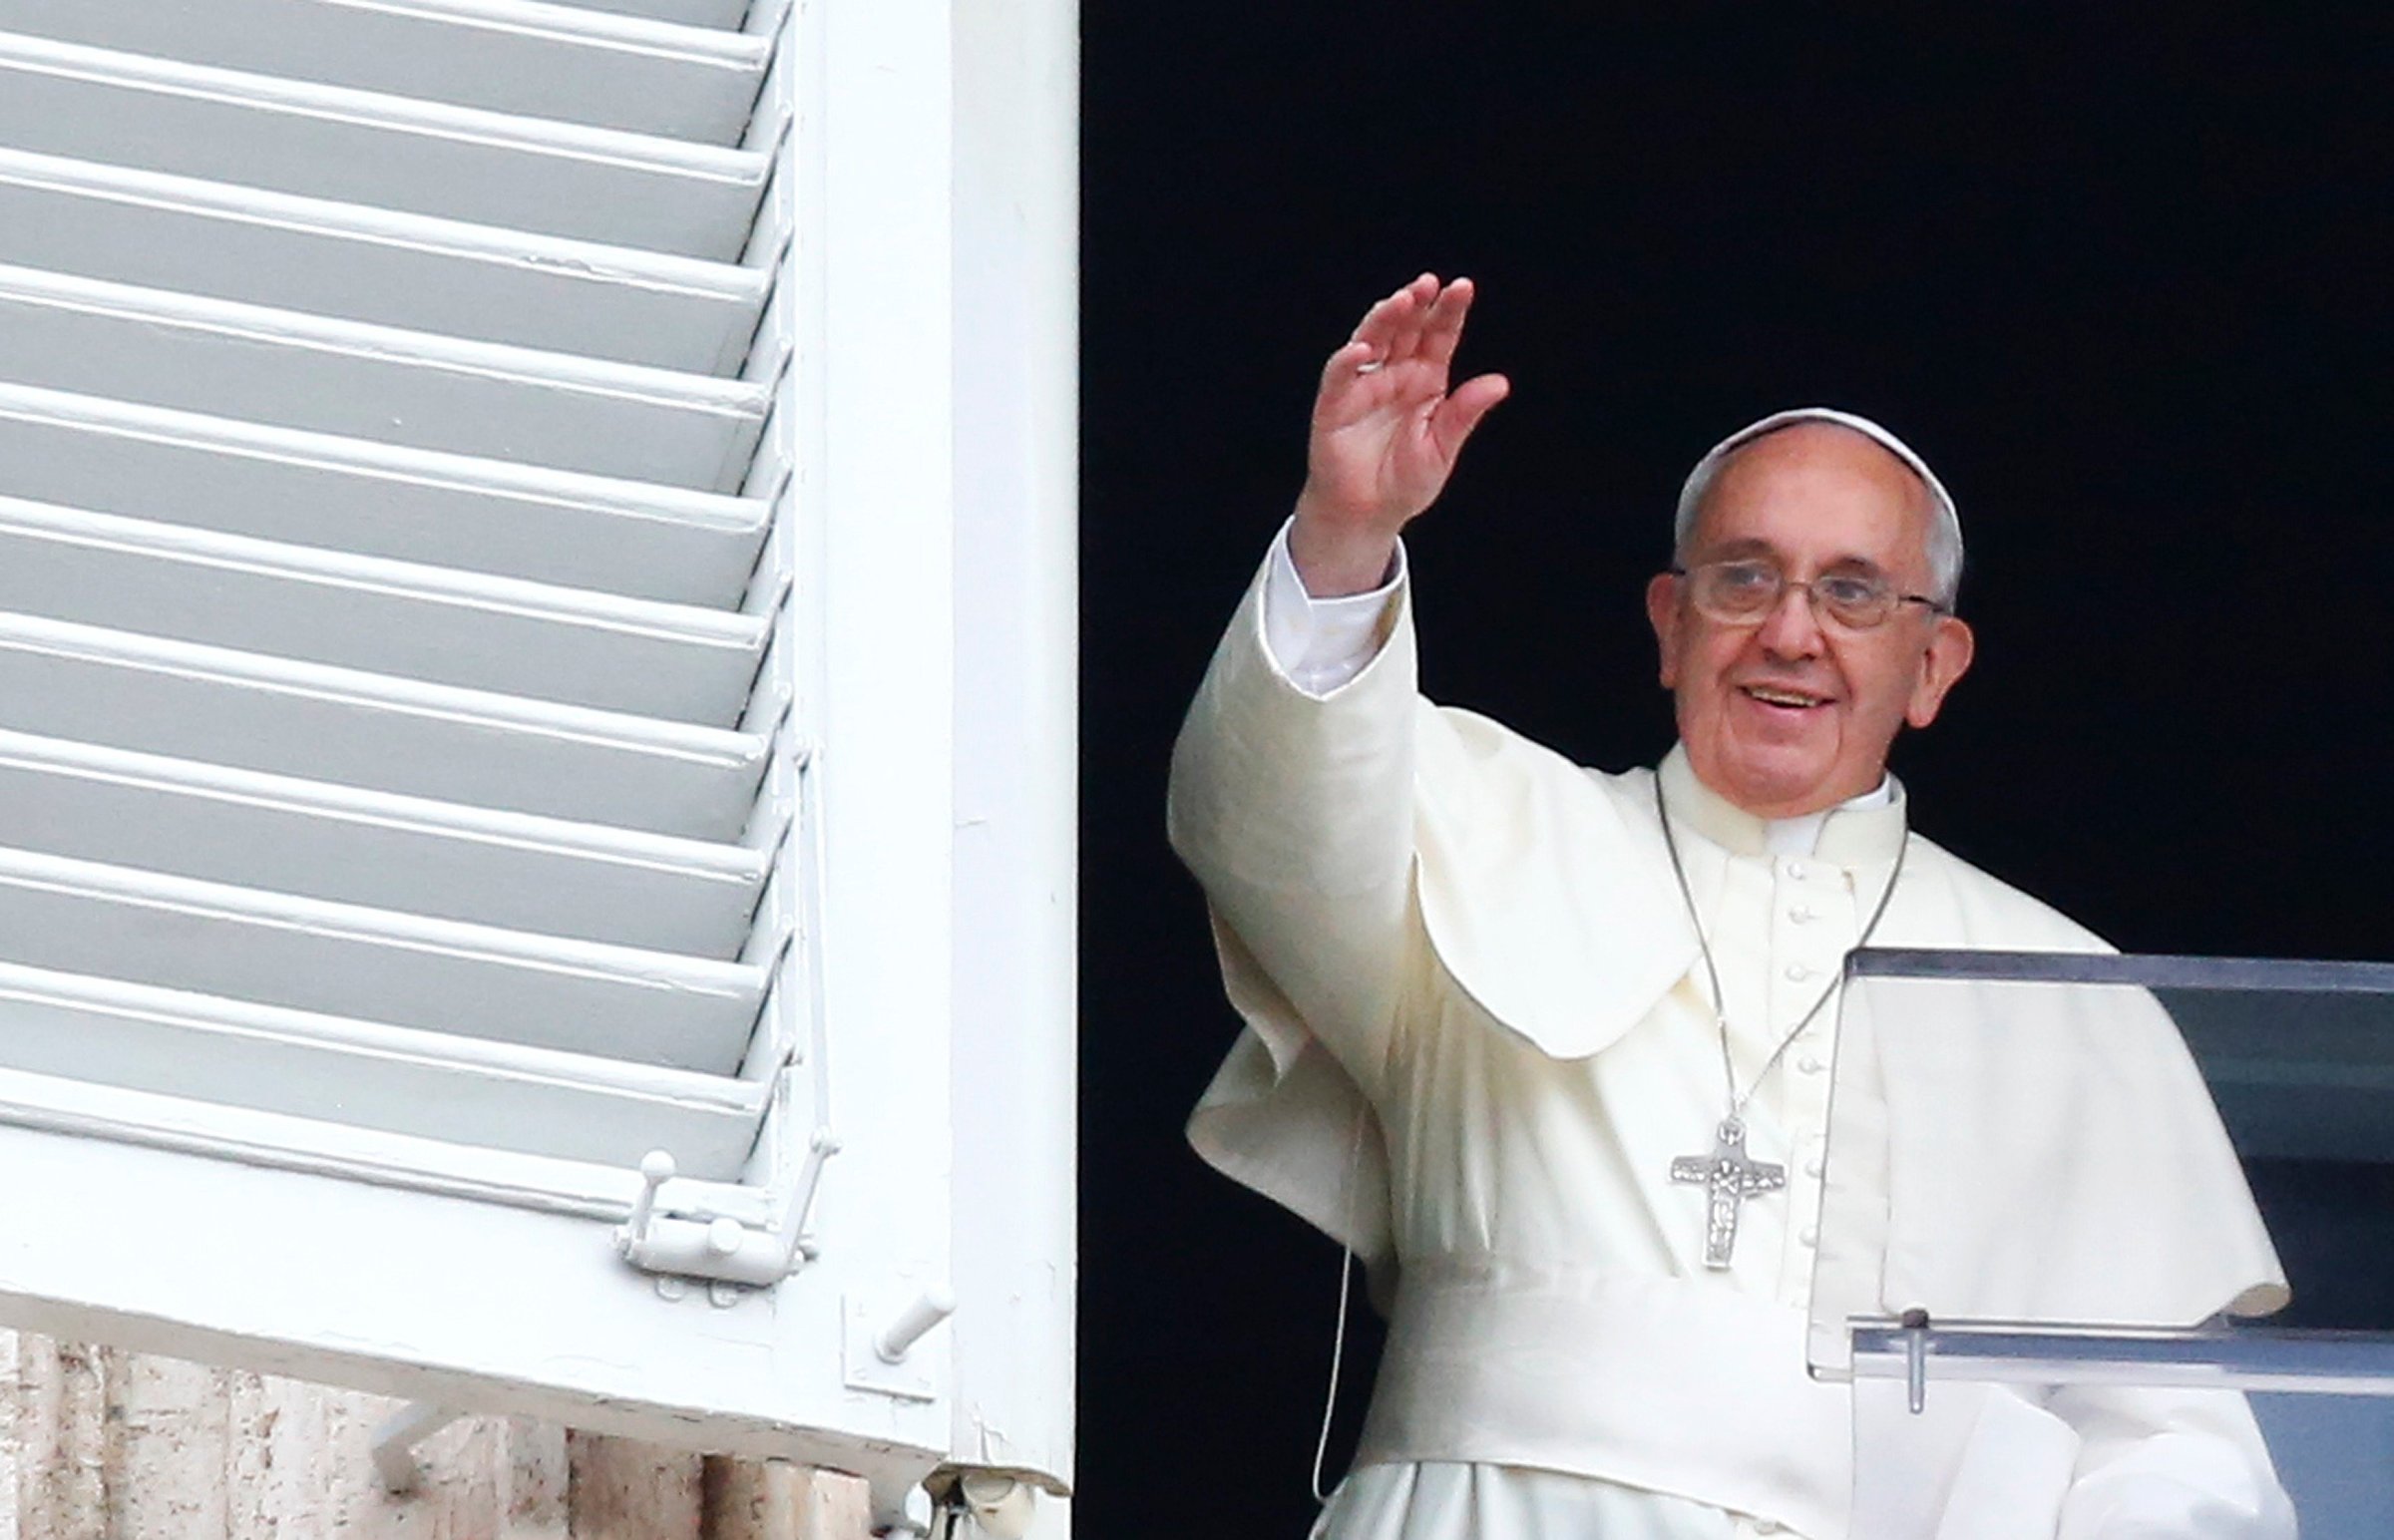 Pope Francis waves as he leads his Sunday Angelus prayer in Saint Peter's square at the Vatican on July 13, 2014.